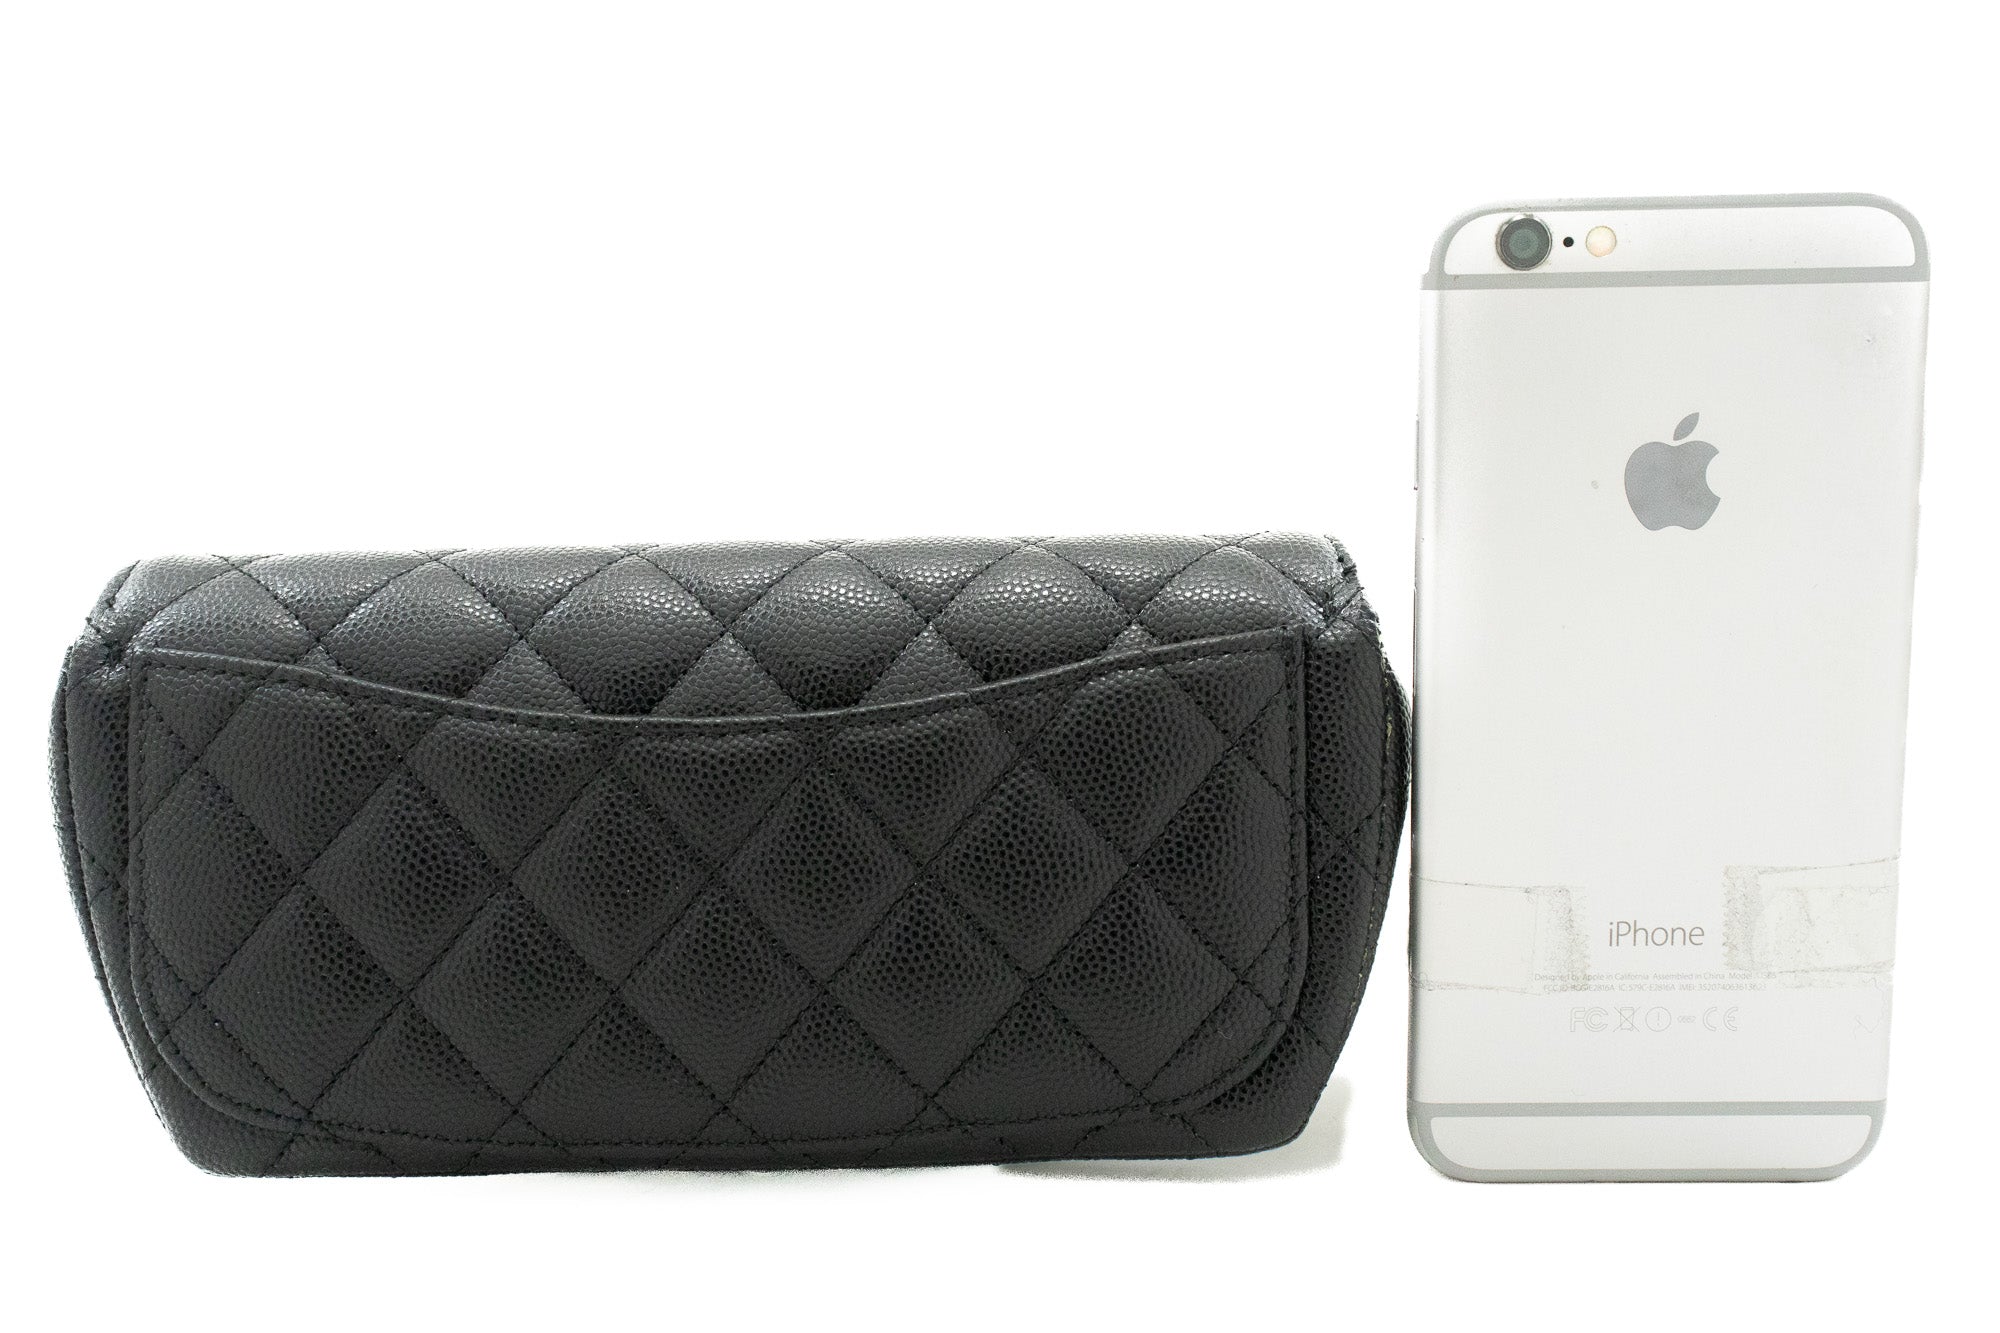 chanel cosmetic bag black leather